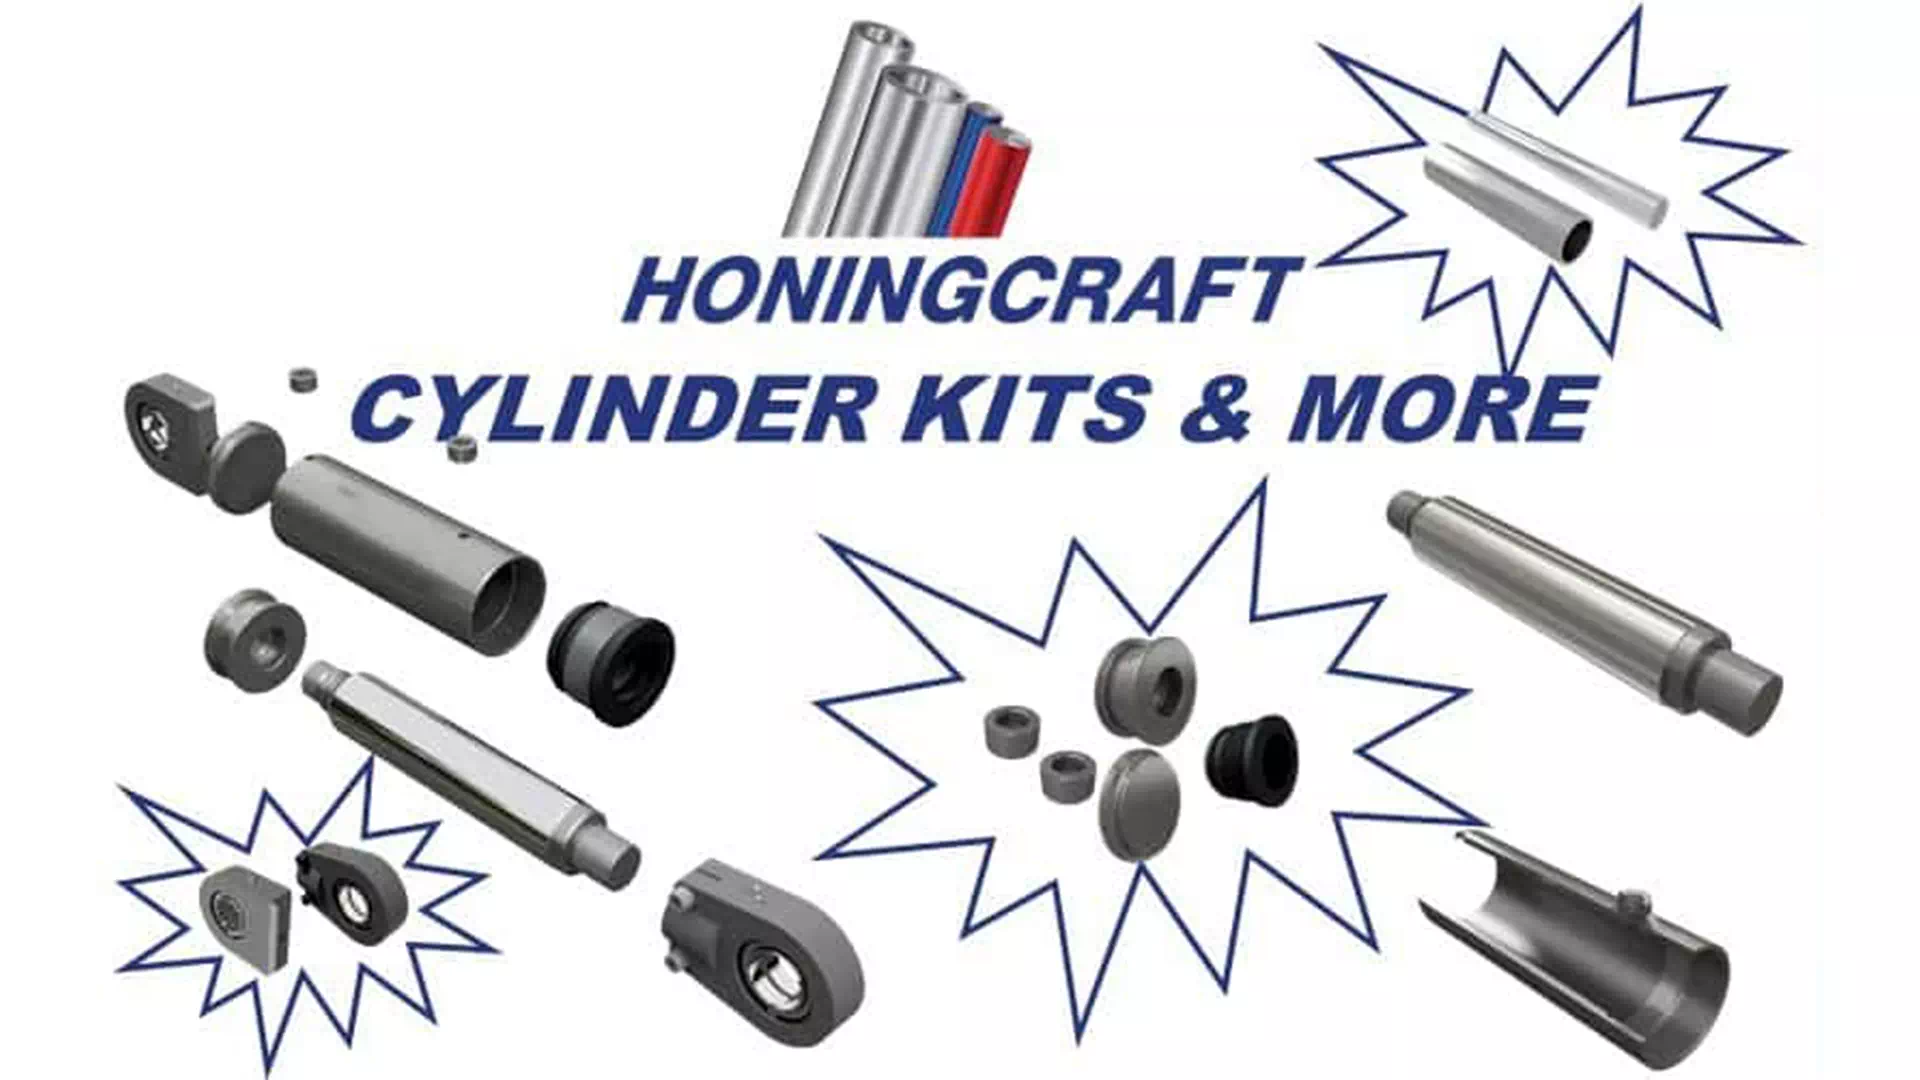 SAVE TIME & MONEY BY USING CYLINDER KITS